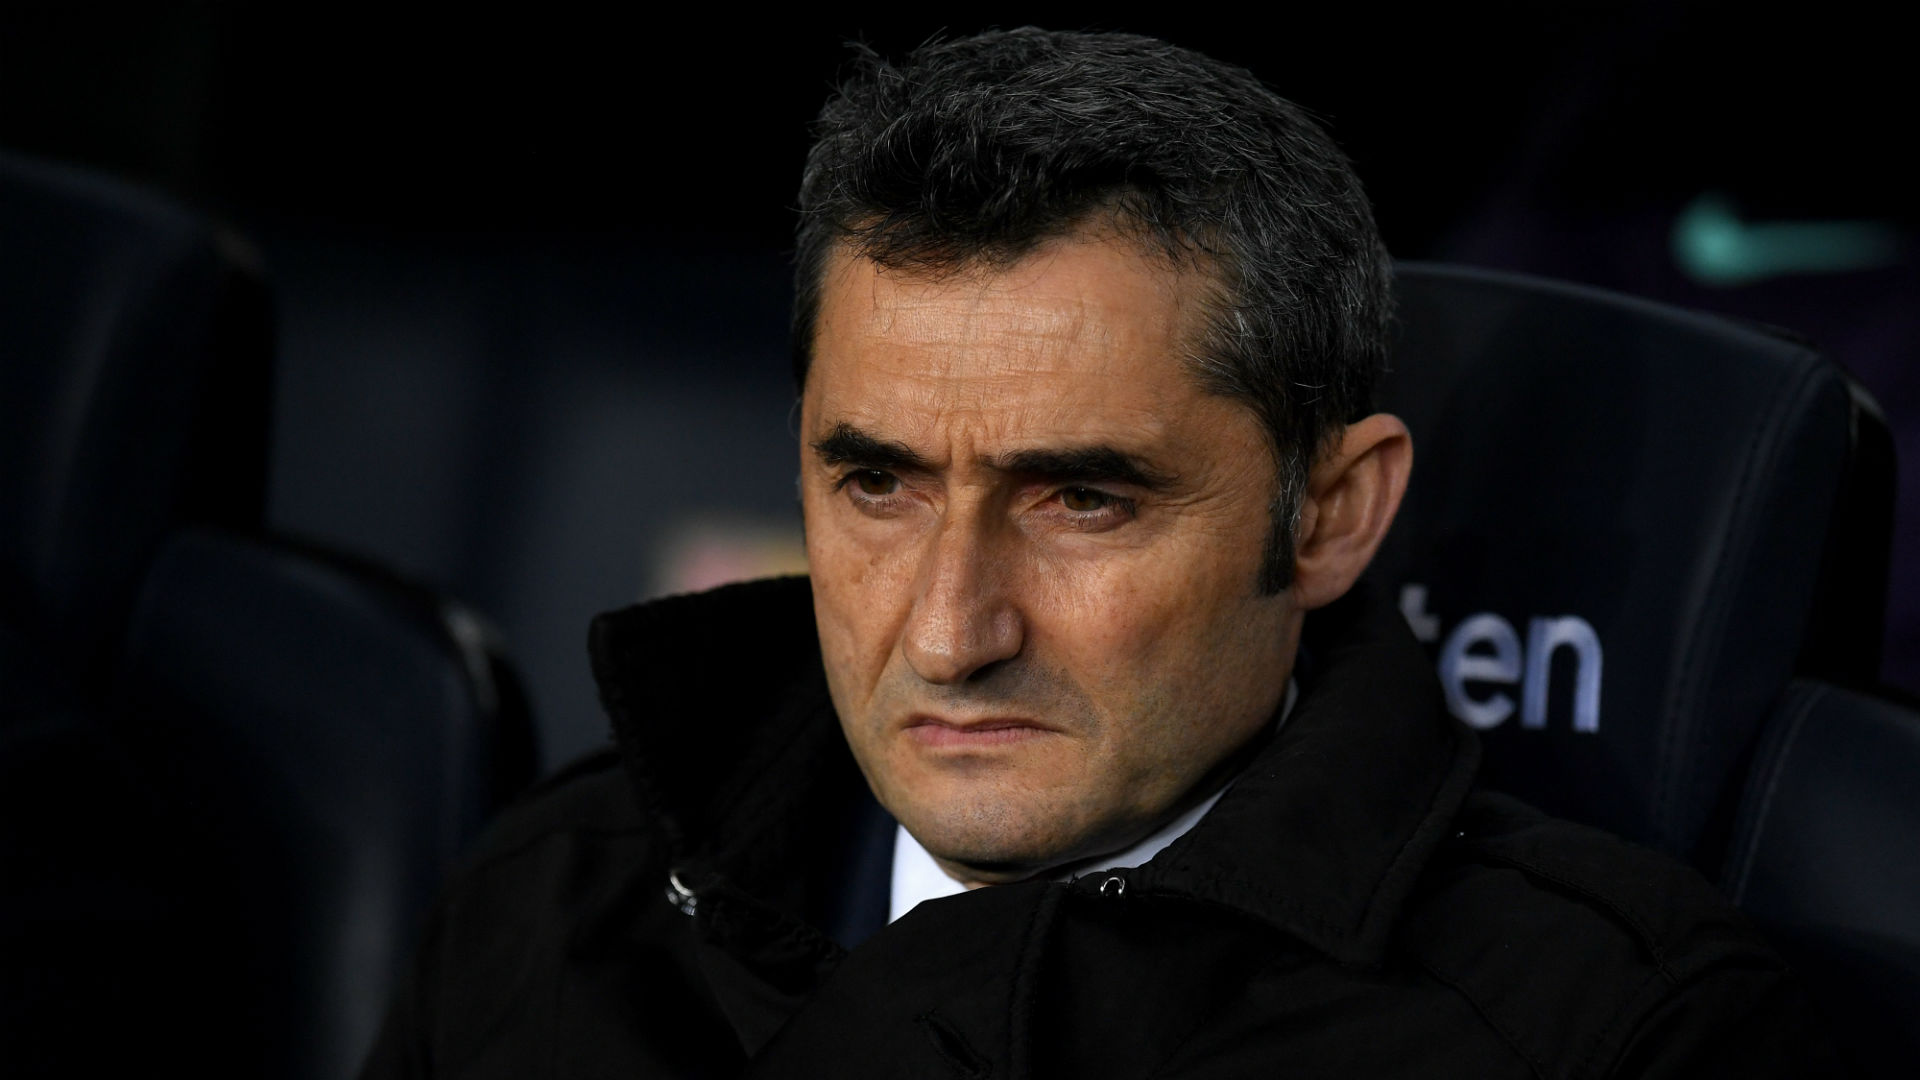 Ernesto Valverde warned his Barcelona players that their 0-0 draw away to Lyon in the Champions League is a precarious result.